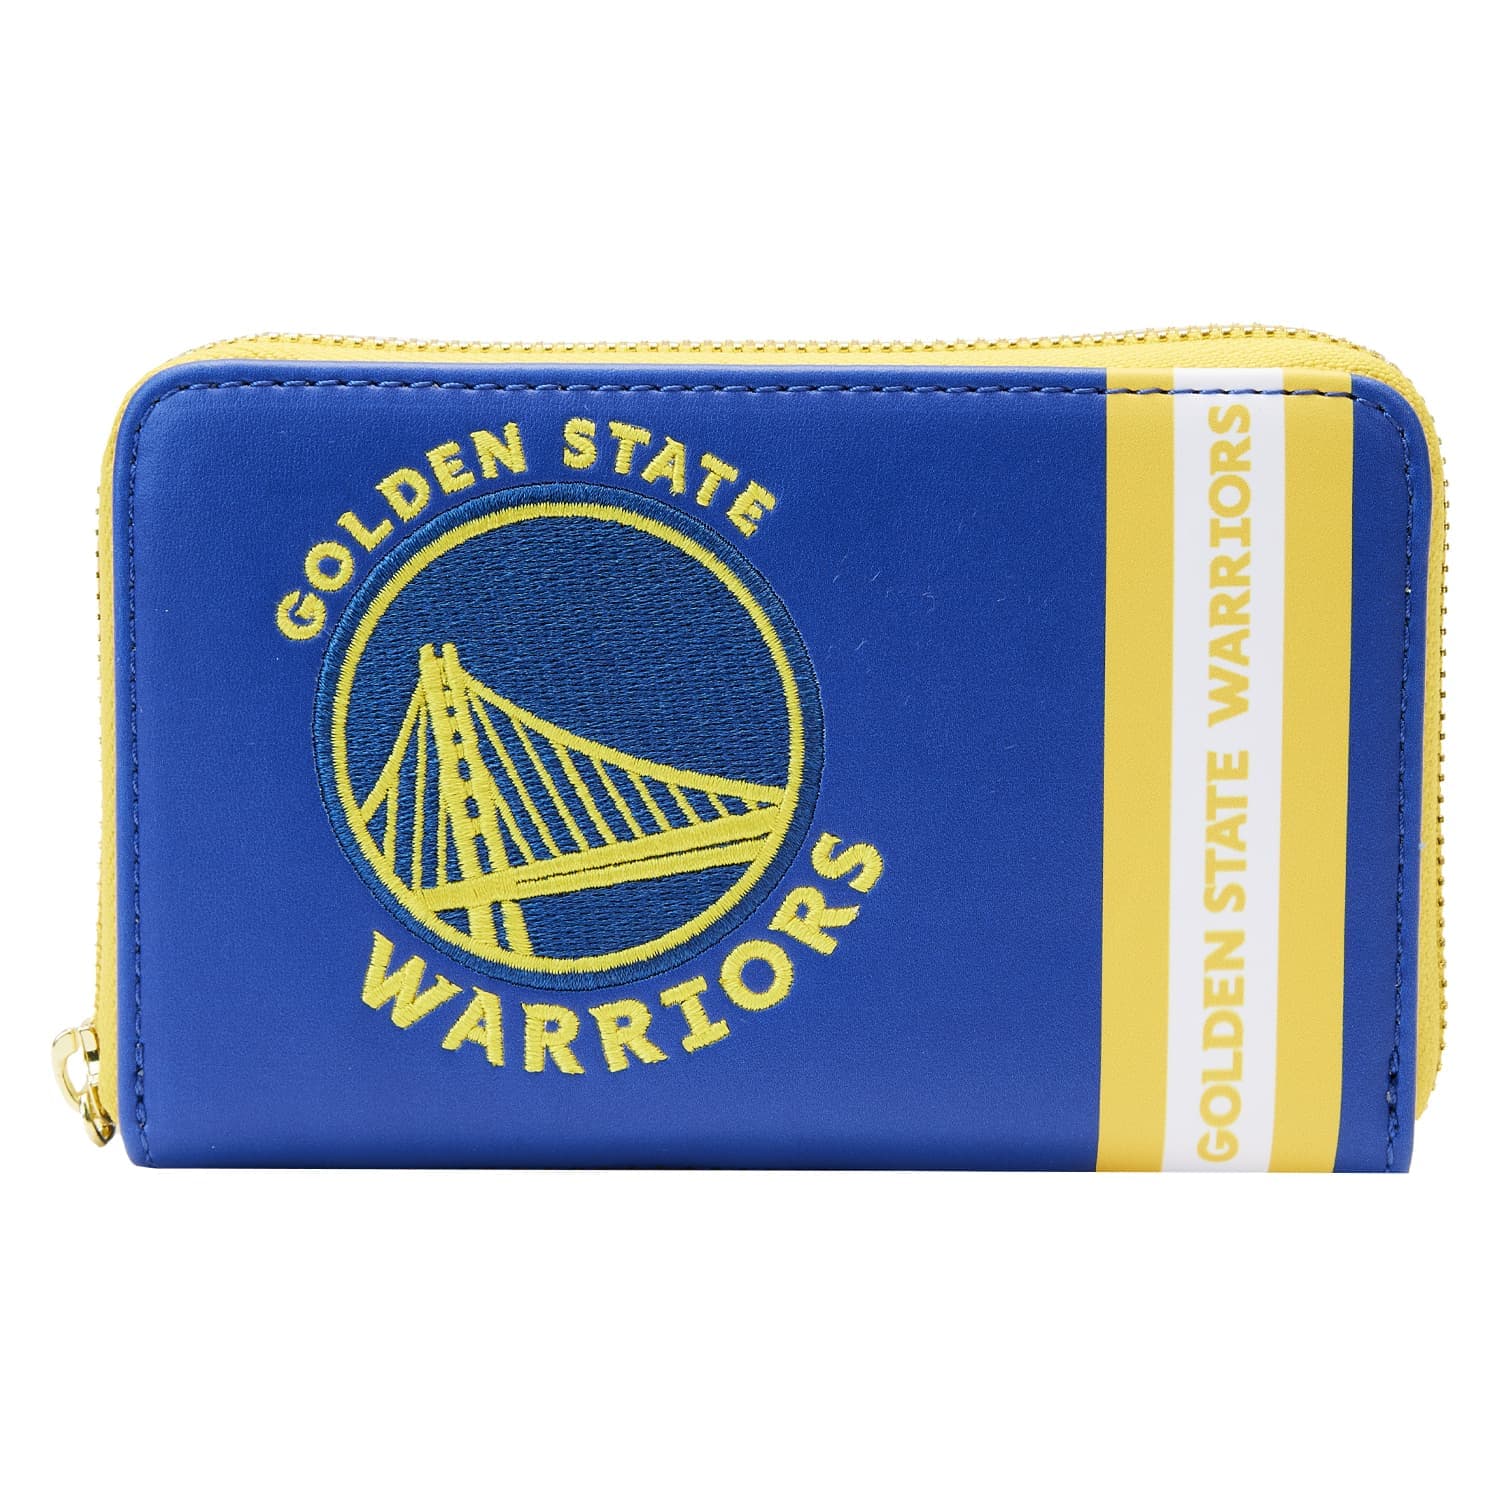 Golden State Warriors Accessories for Sale